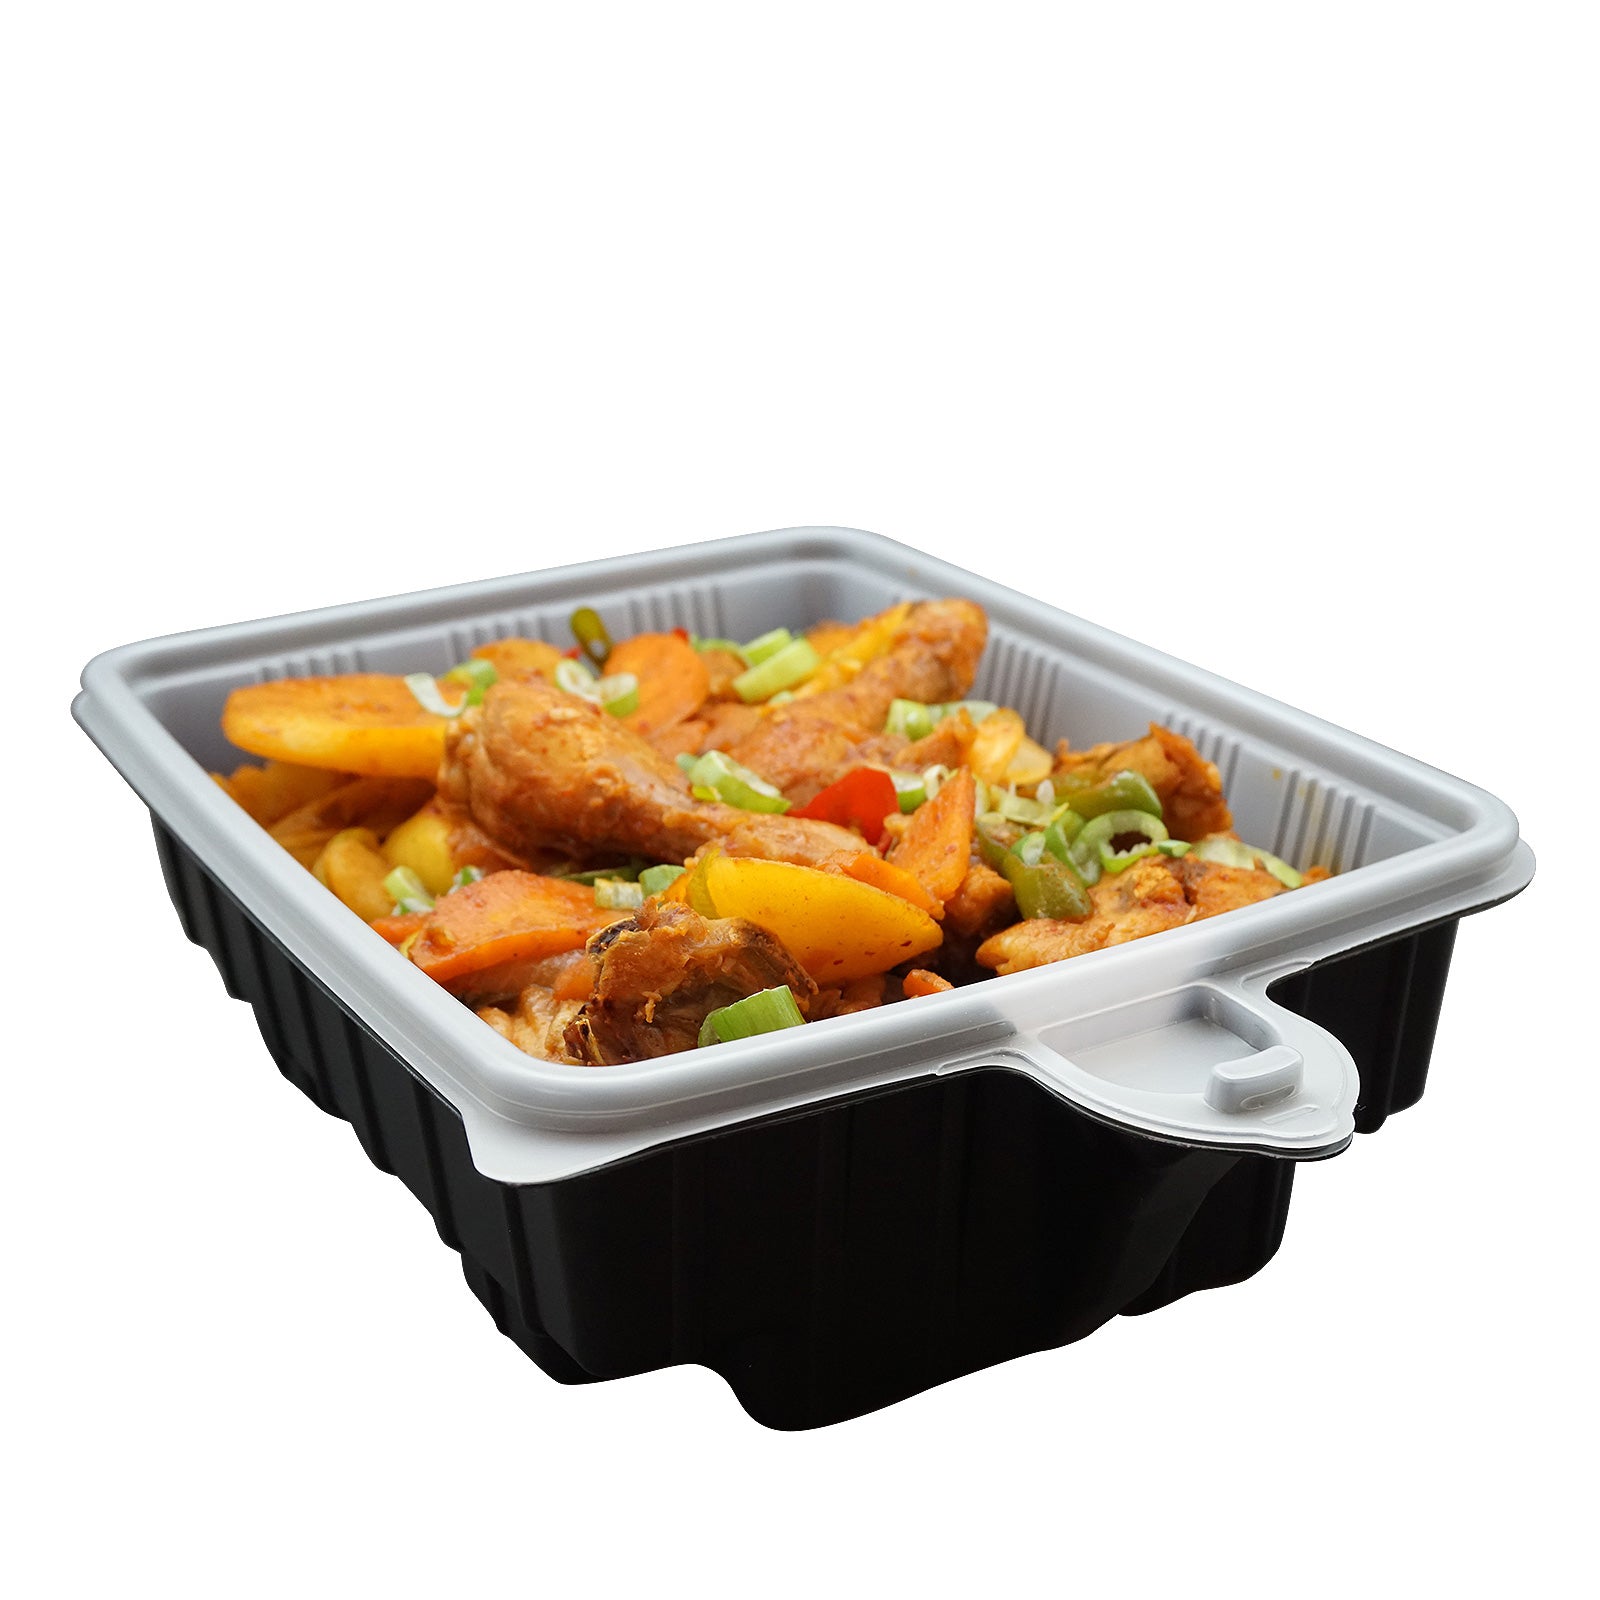 Sirak Food 30-Pack Dalat Heating Lunch Box Container 33cm Rectangle | Easy Lunch Storage